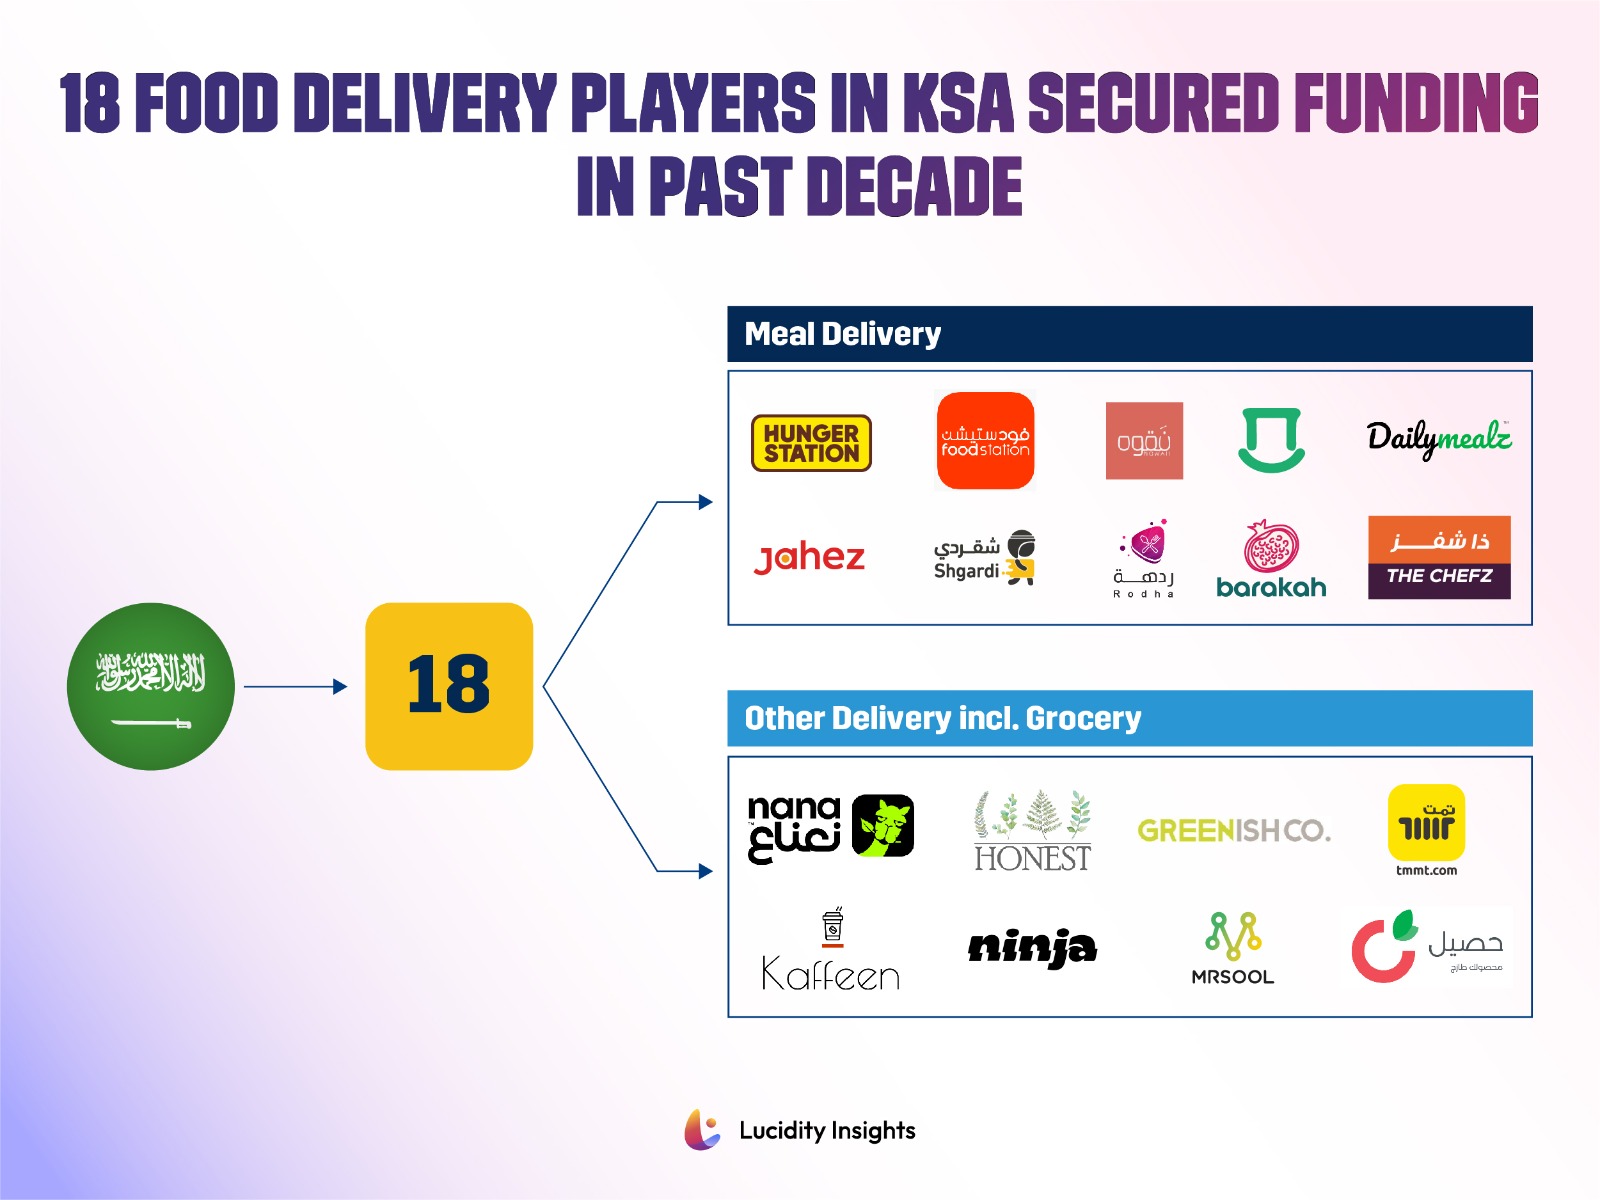 18 Food Delivery Players in KSA Secure Funding in Past Decade